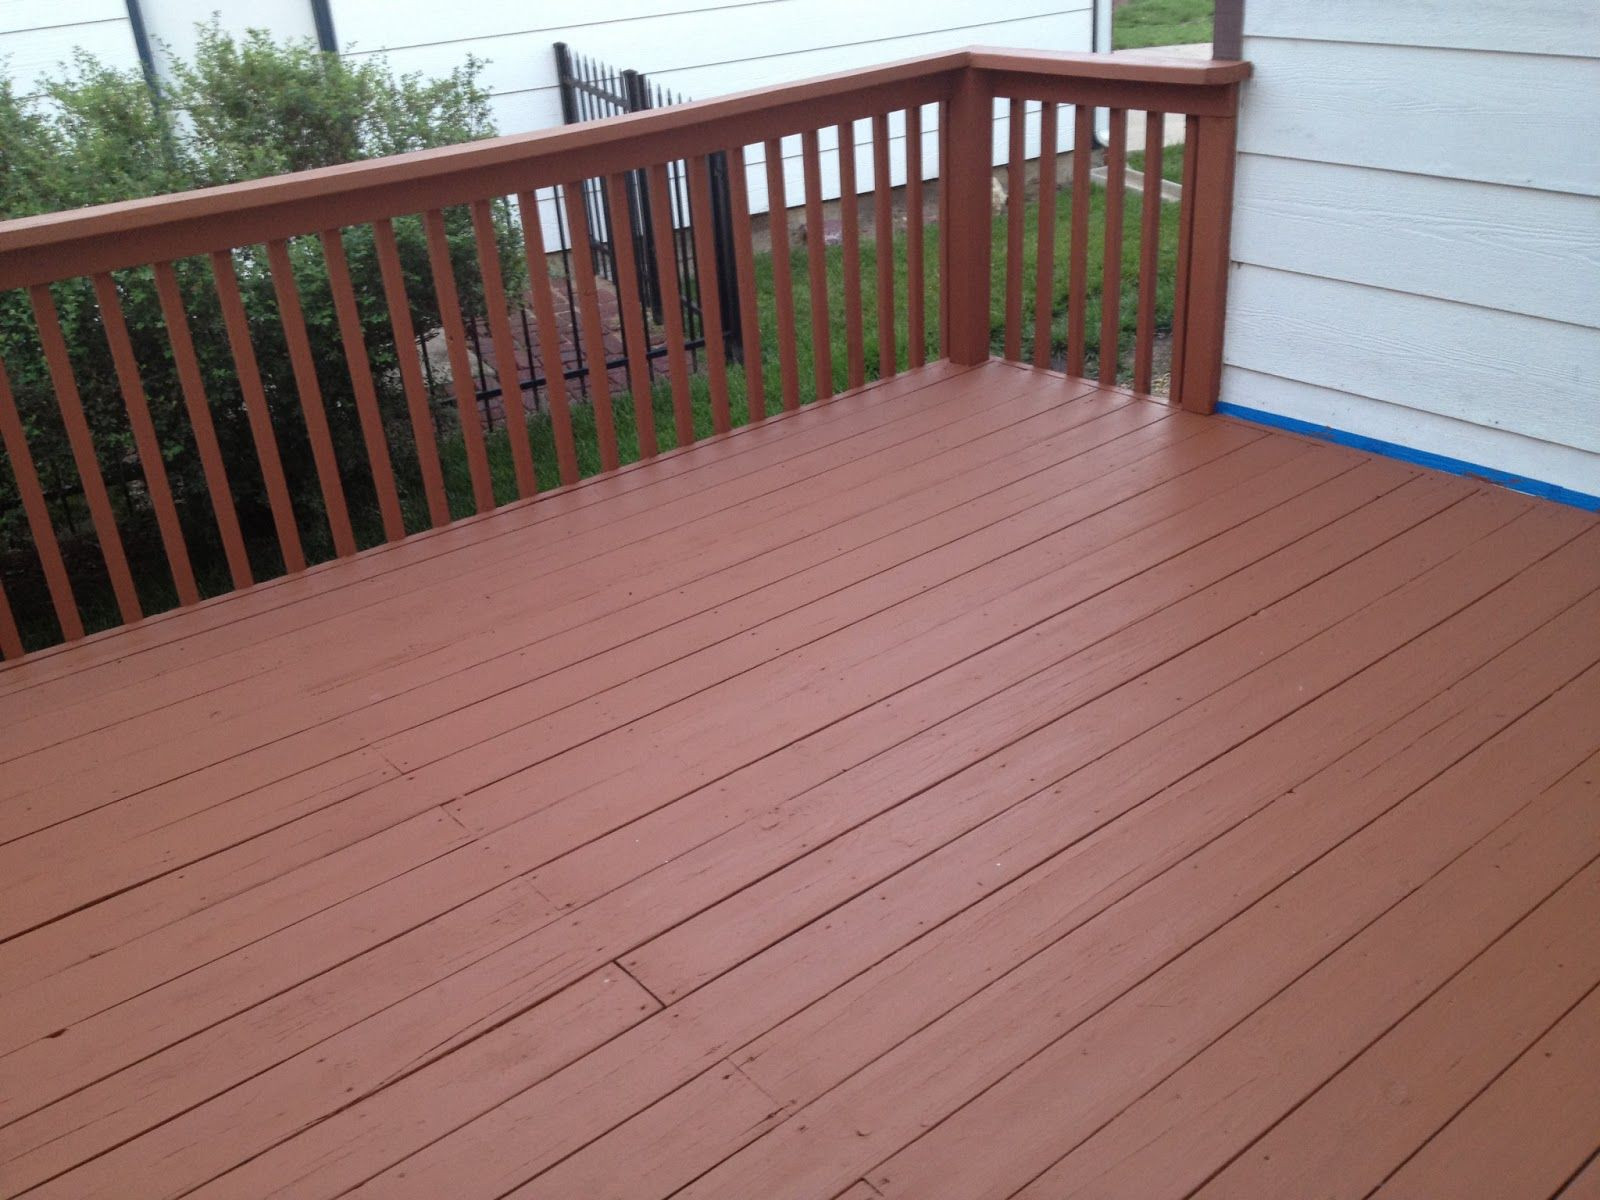 Behr Deck Over Paint Reviews
 Behr Deckover Review With images